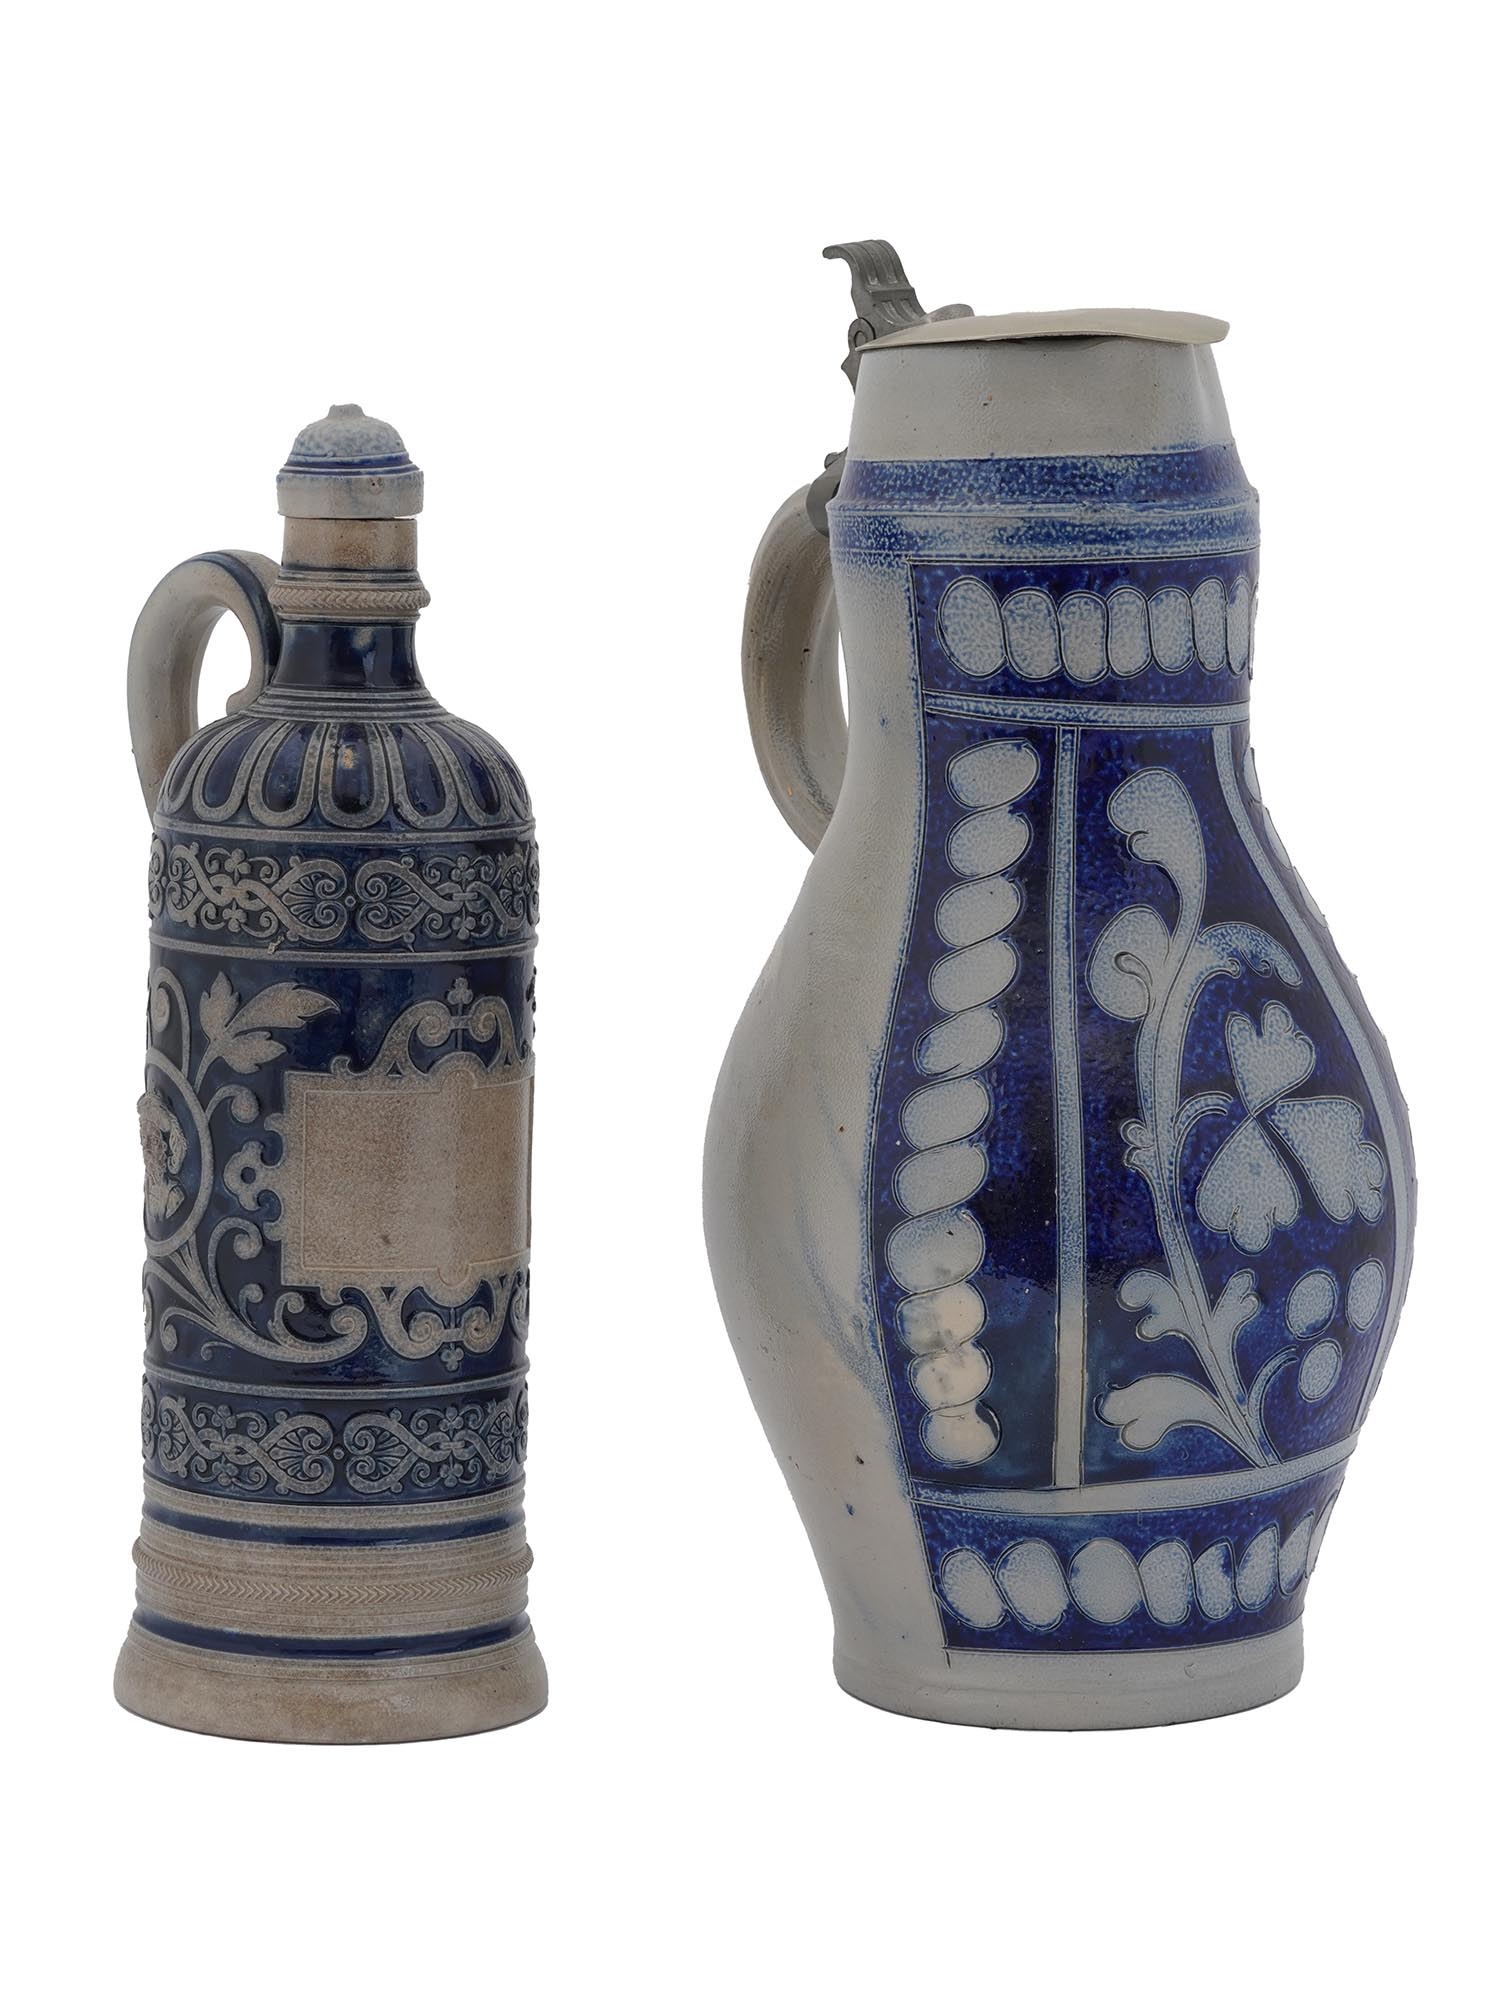 ANTIQUE FRENCH BLUE AND WHITE CERAMIC CIDER JUGS PIC-0